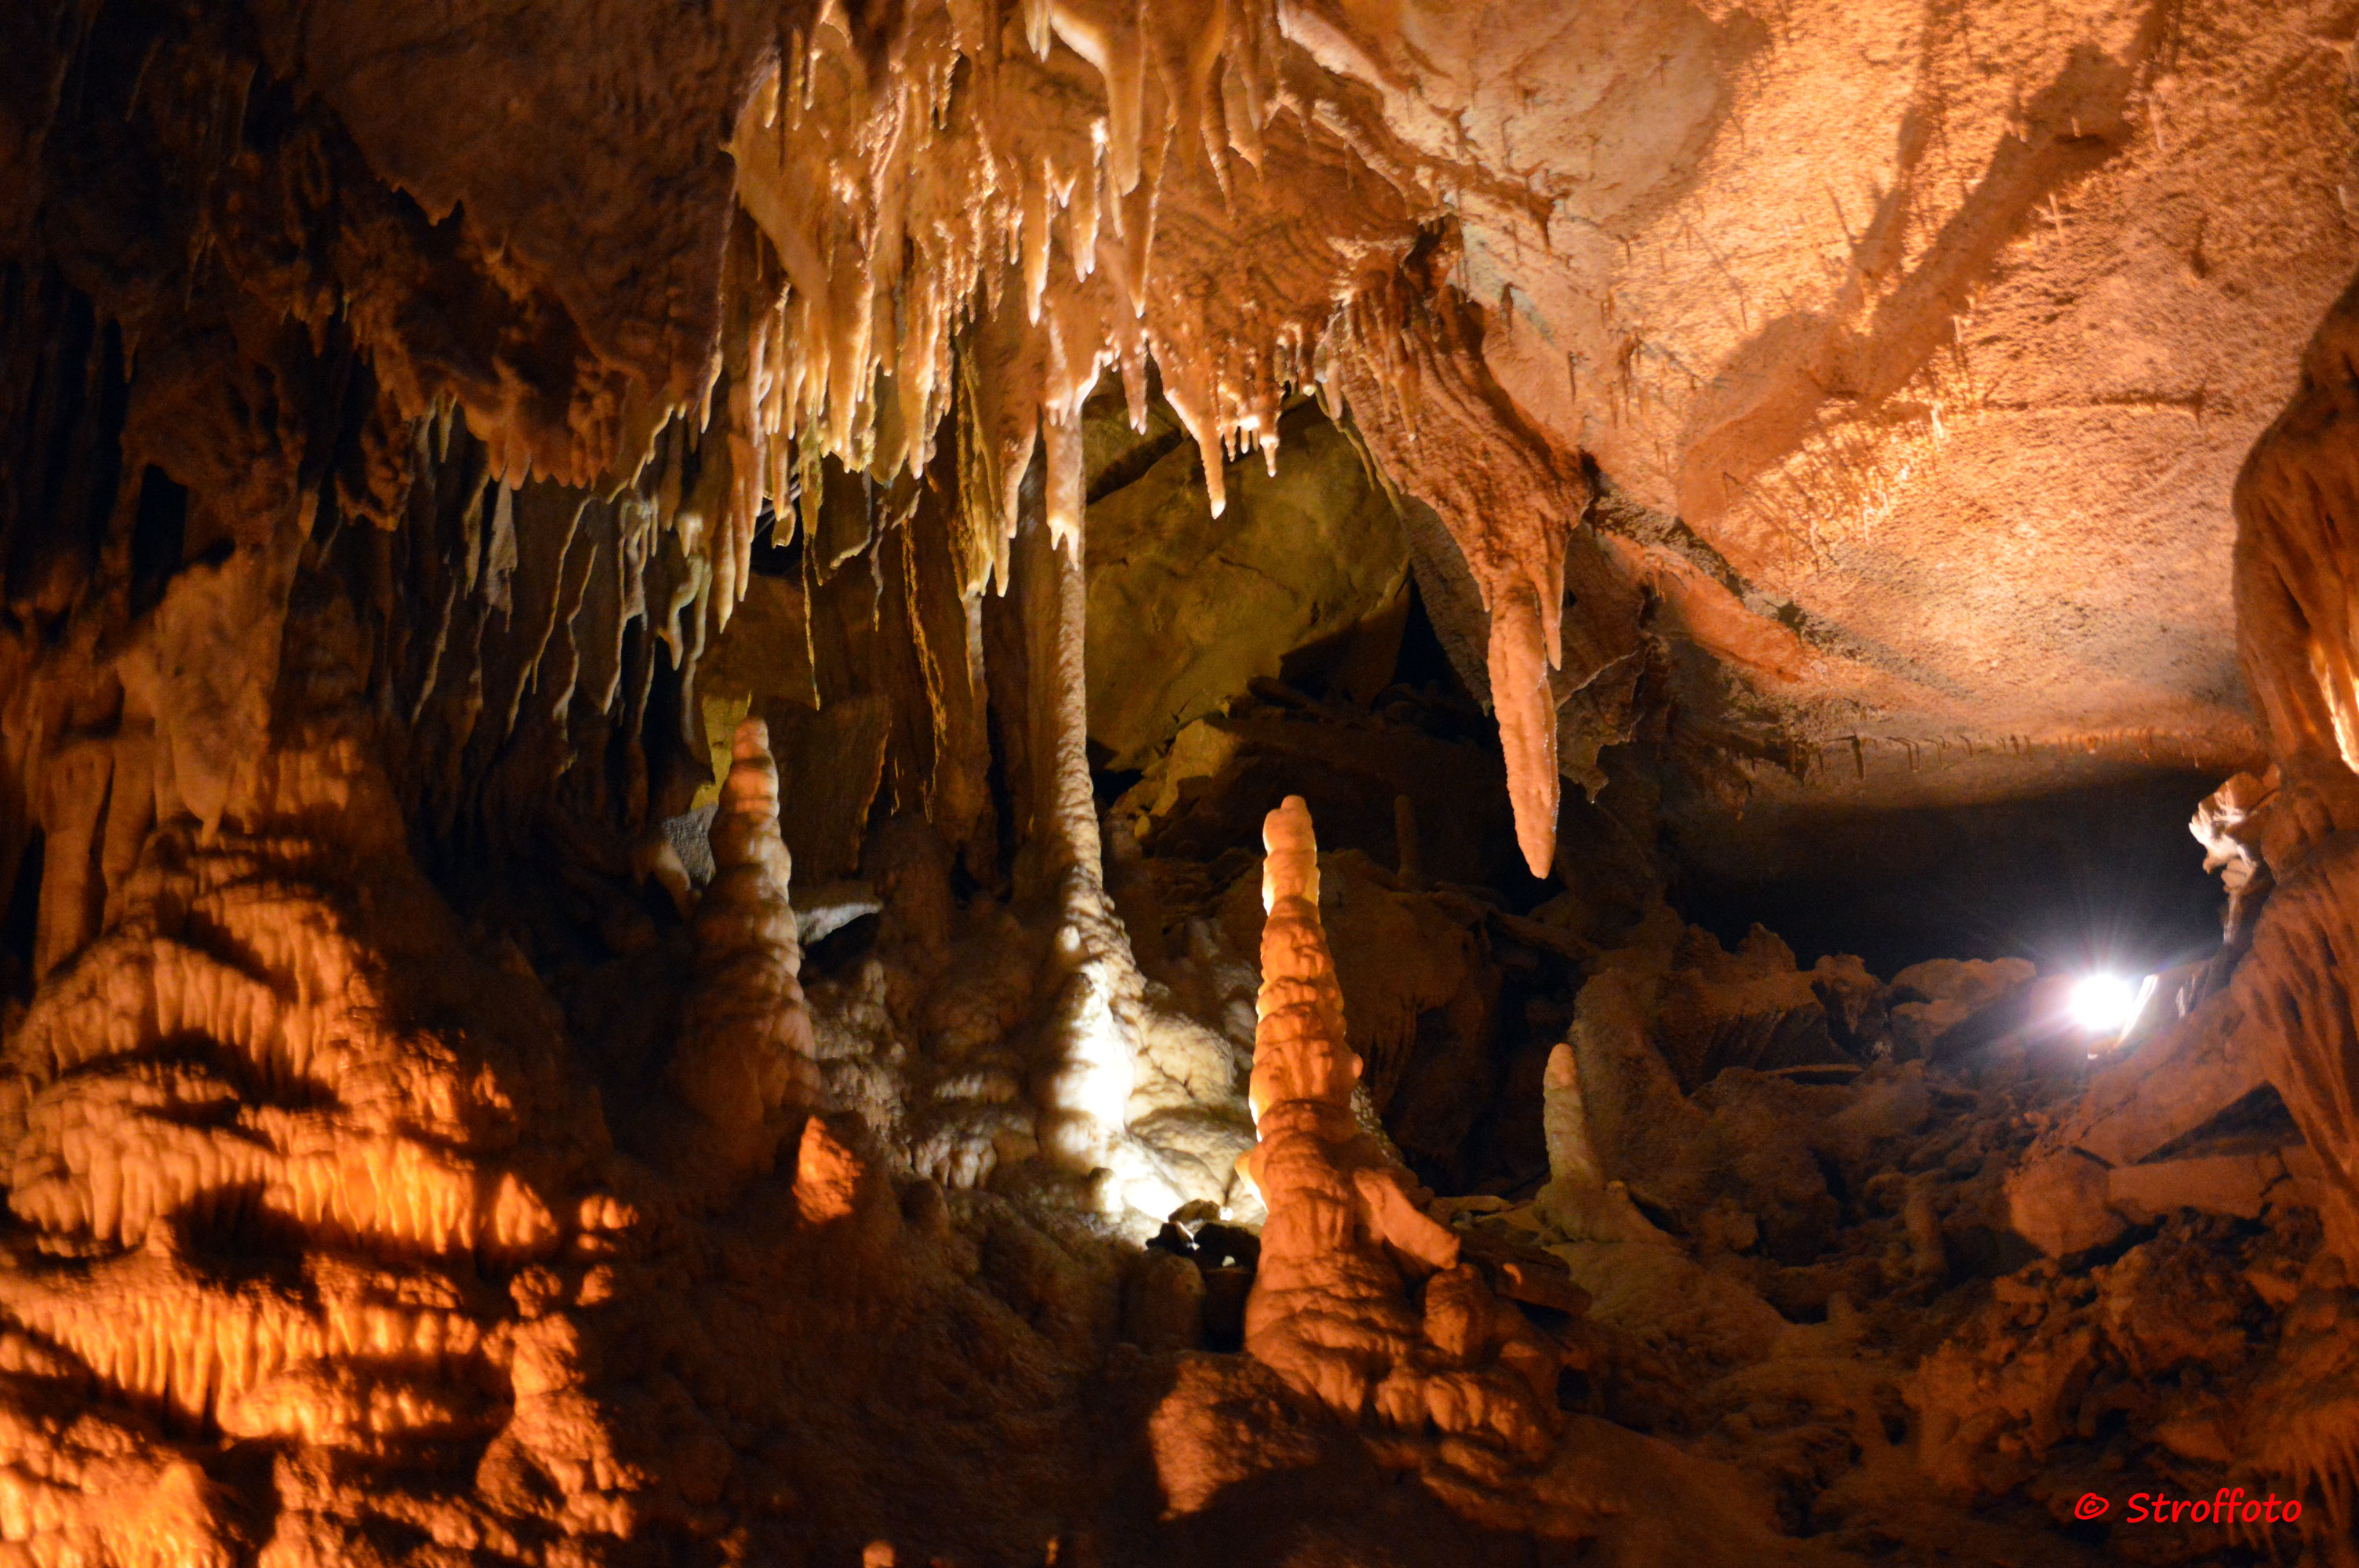 Exploring Mammoth Cave National Park